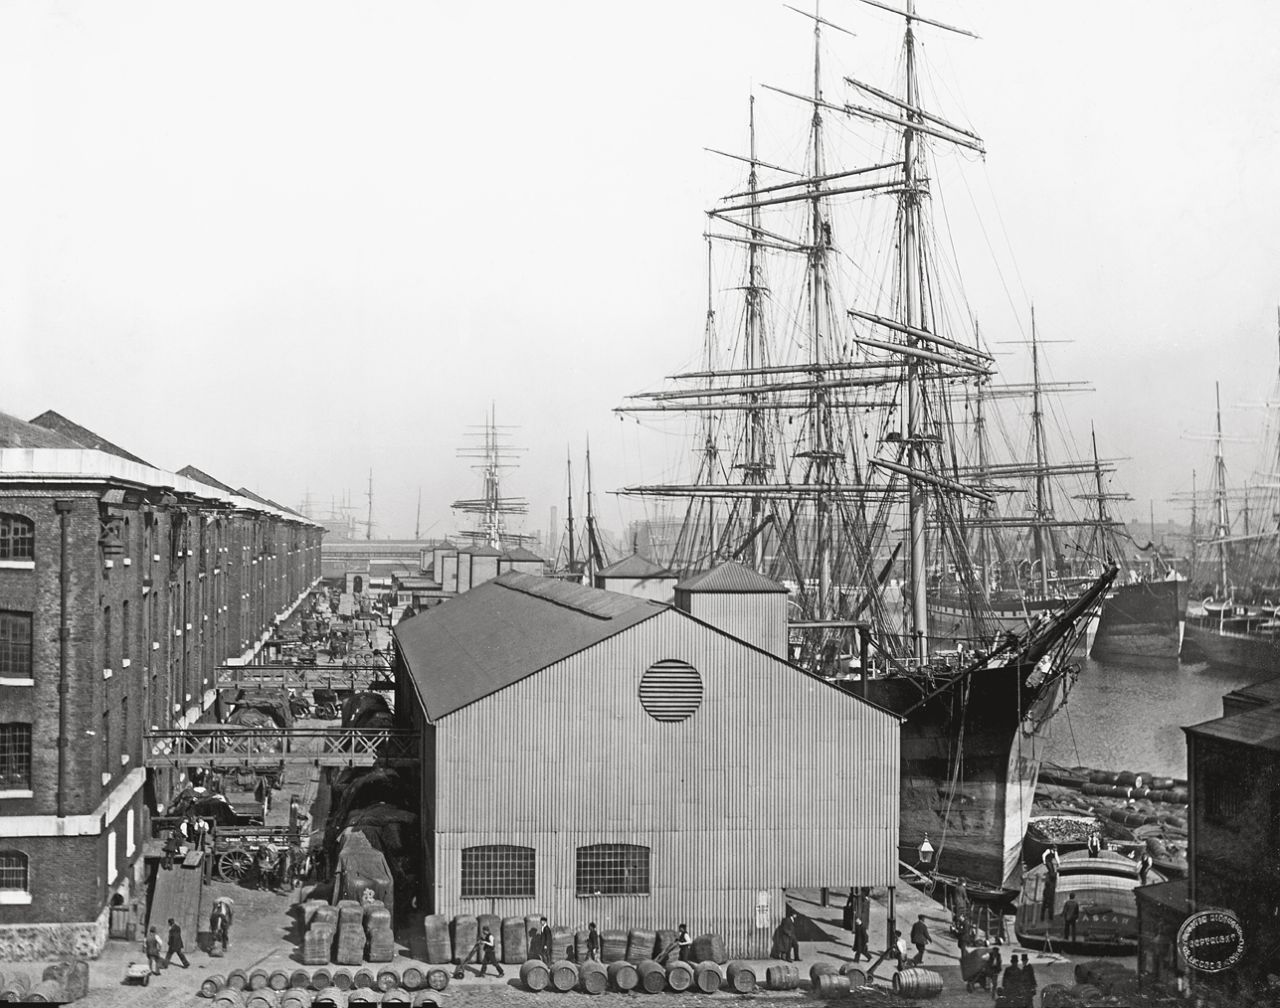 Long gone are the days of wooden merchant vessels, like this one pictured in London in 1893. "No-one is completely dismissing the idea of unmanned ships at some point in the future," said Bennett. "But I say that in the same way that no-one dismisses the idea that robots will be running society at some point in the future."